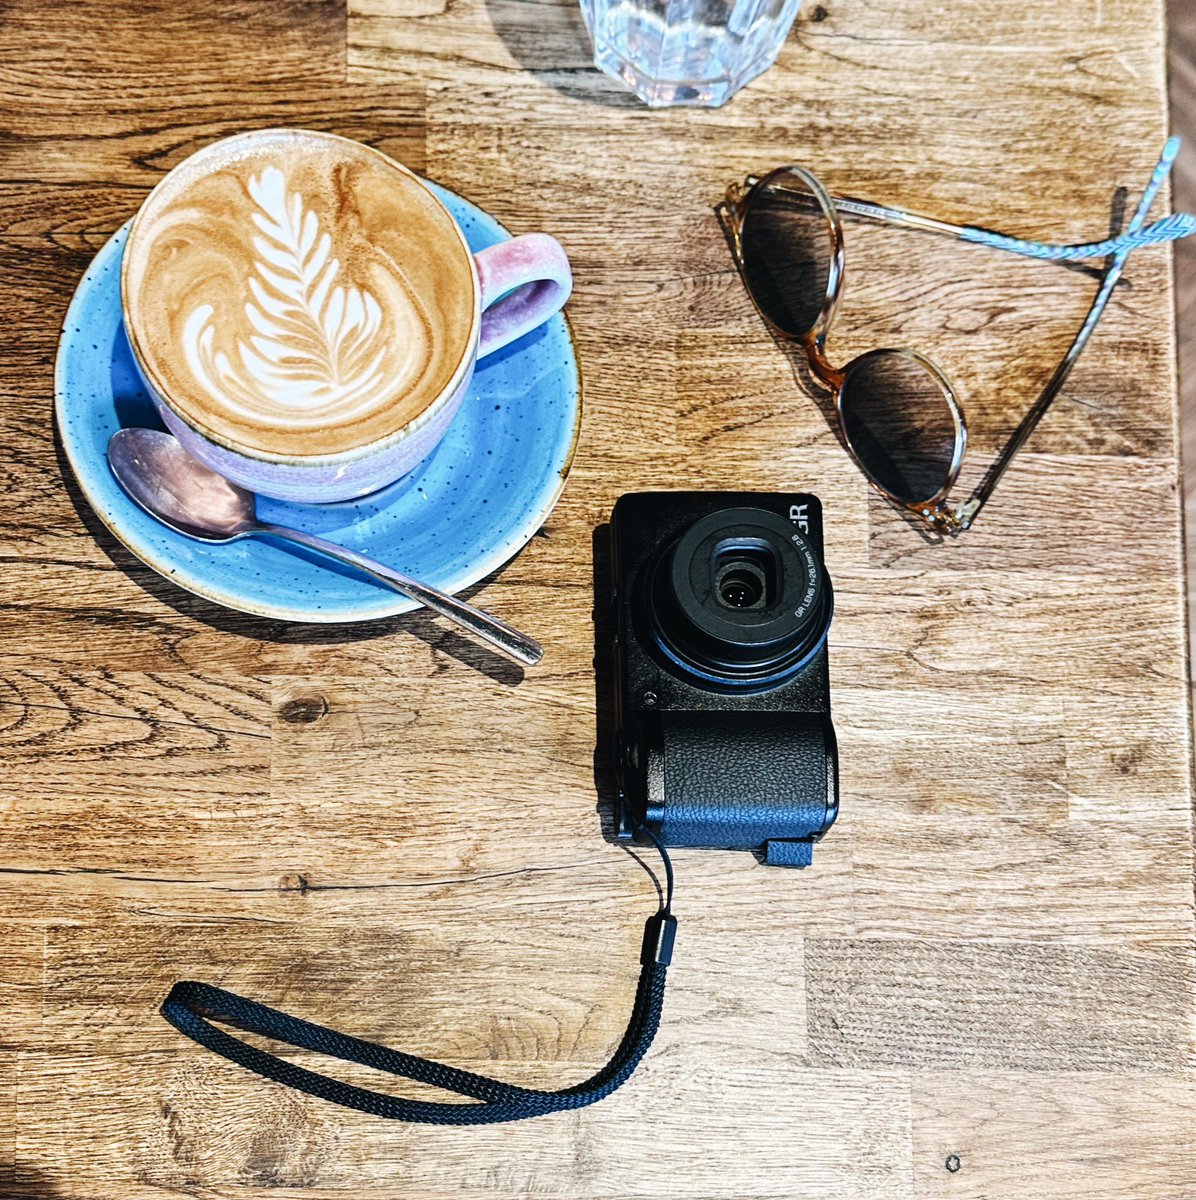 Ricoh & caffè With the GRIIIx in Glasgow last weekend. Reminded me what a great little pocket camera the GR is (been using the GRIII this weekend) #camera #cameras #coffee #cafe #café #caffe #caffè #ricoh #ricohgr #ricohgriiix